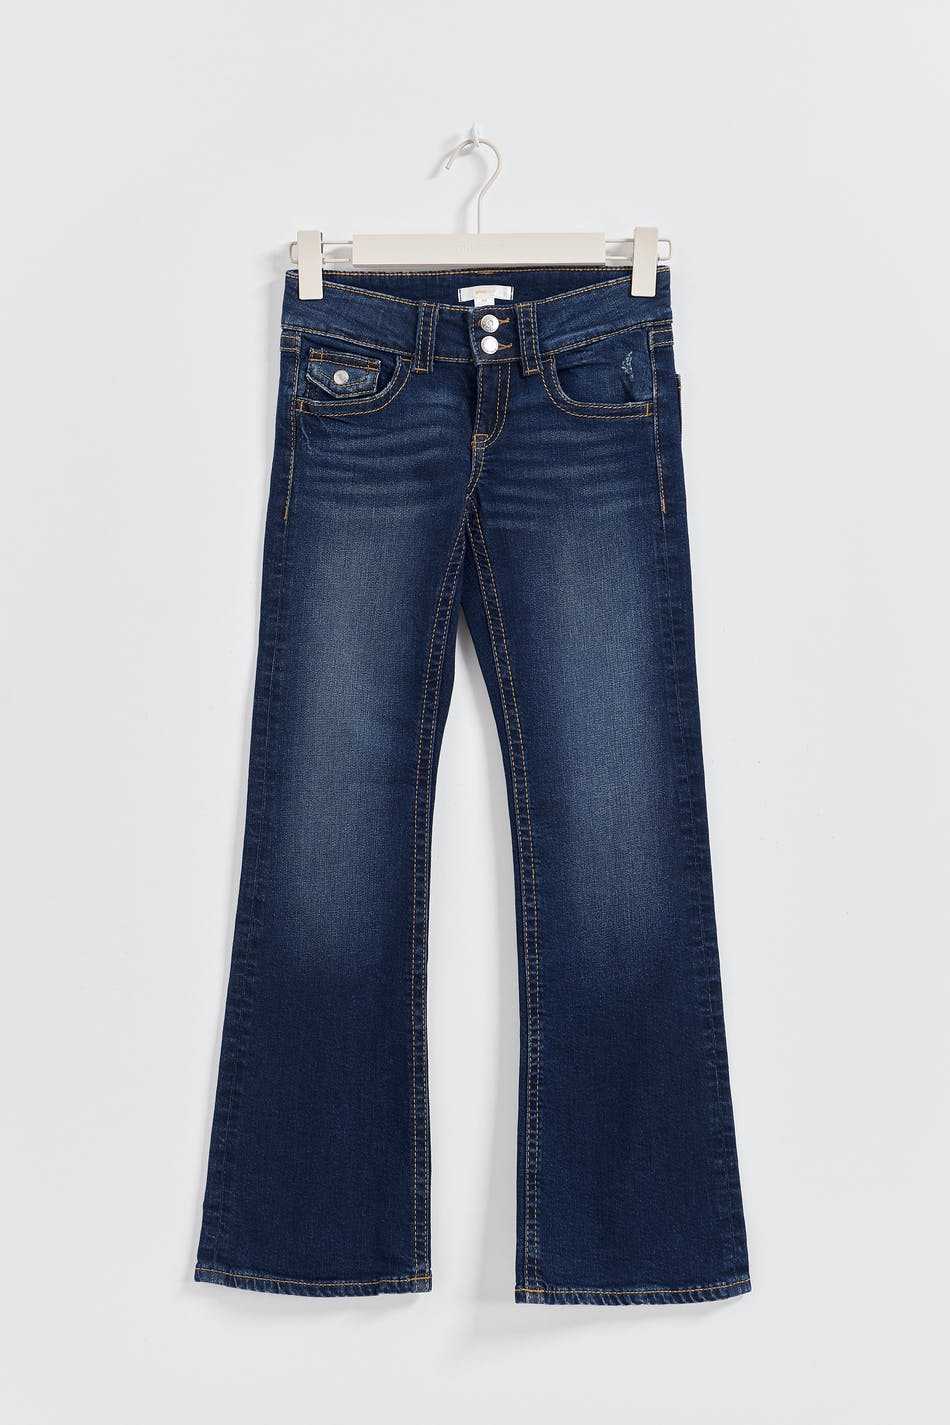 Gina Tricot - Chunky basic flare jeans - wide jeans- Blue - 134 - Female